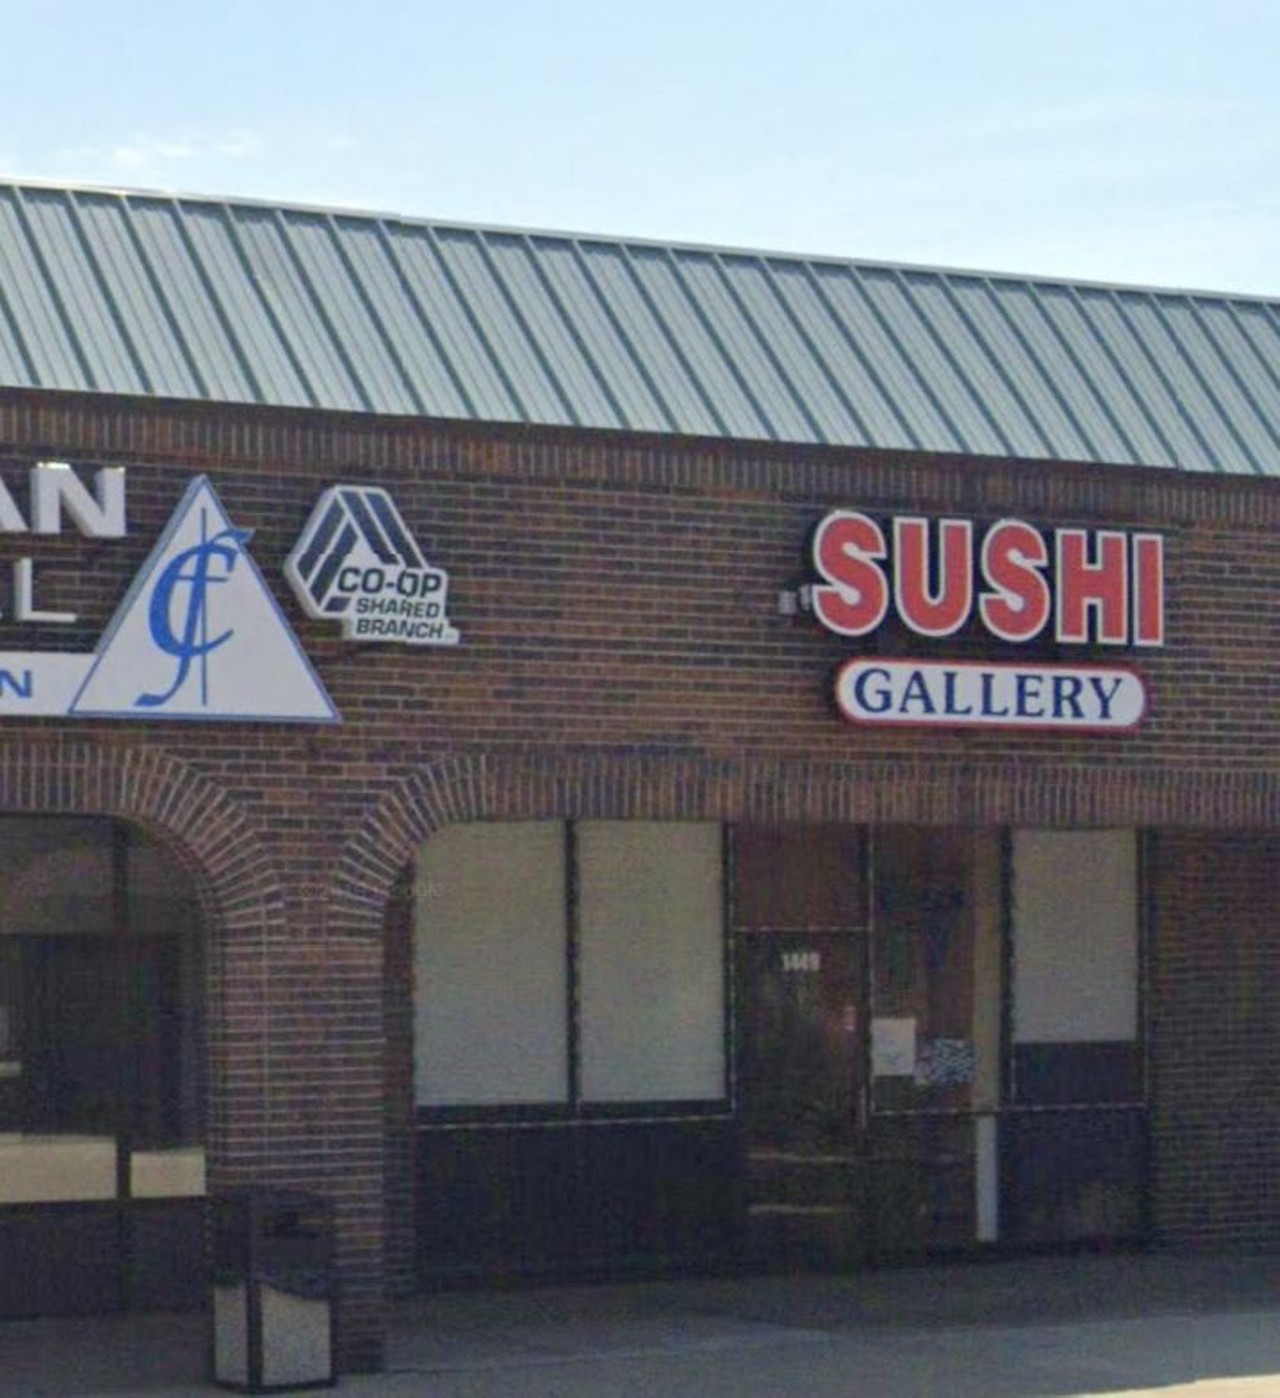 Sushi Gallery
1449 W. 14 Mile Rd., Madison Heights; 248-291-5987; sushigallerymi.weebly.com
Sushi lovers might pass this unassuming sushi spot because not only is it in a strip mall but it's nestled in a hard-to-see corner next to a credit union. Well, thanks to their large rolls, affordable prices, and unpretentious atmosphere are sure to put Sushi Gallery on your personal dining map for good. They have non-sushi entrees, too, like bibimbap, spicy pork, bulgogi, chicken katsu, udon, and ramen dishes. 
Photo via GoogleMaps